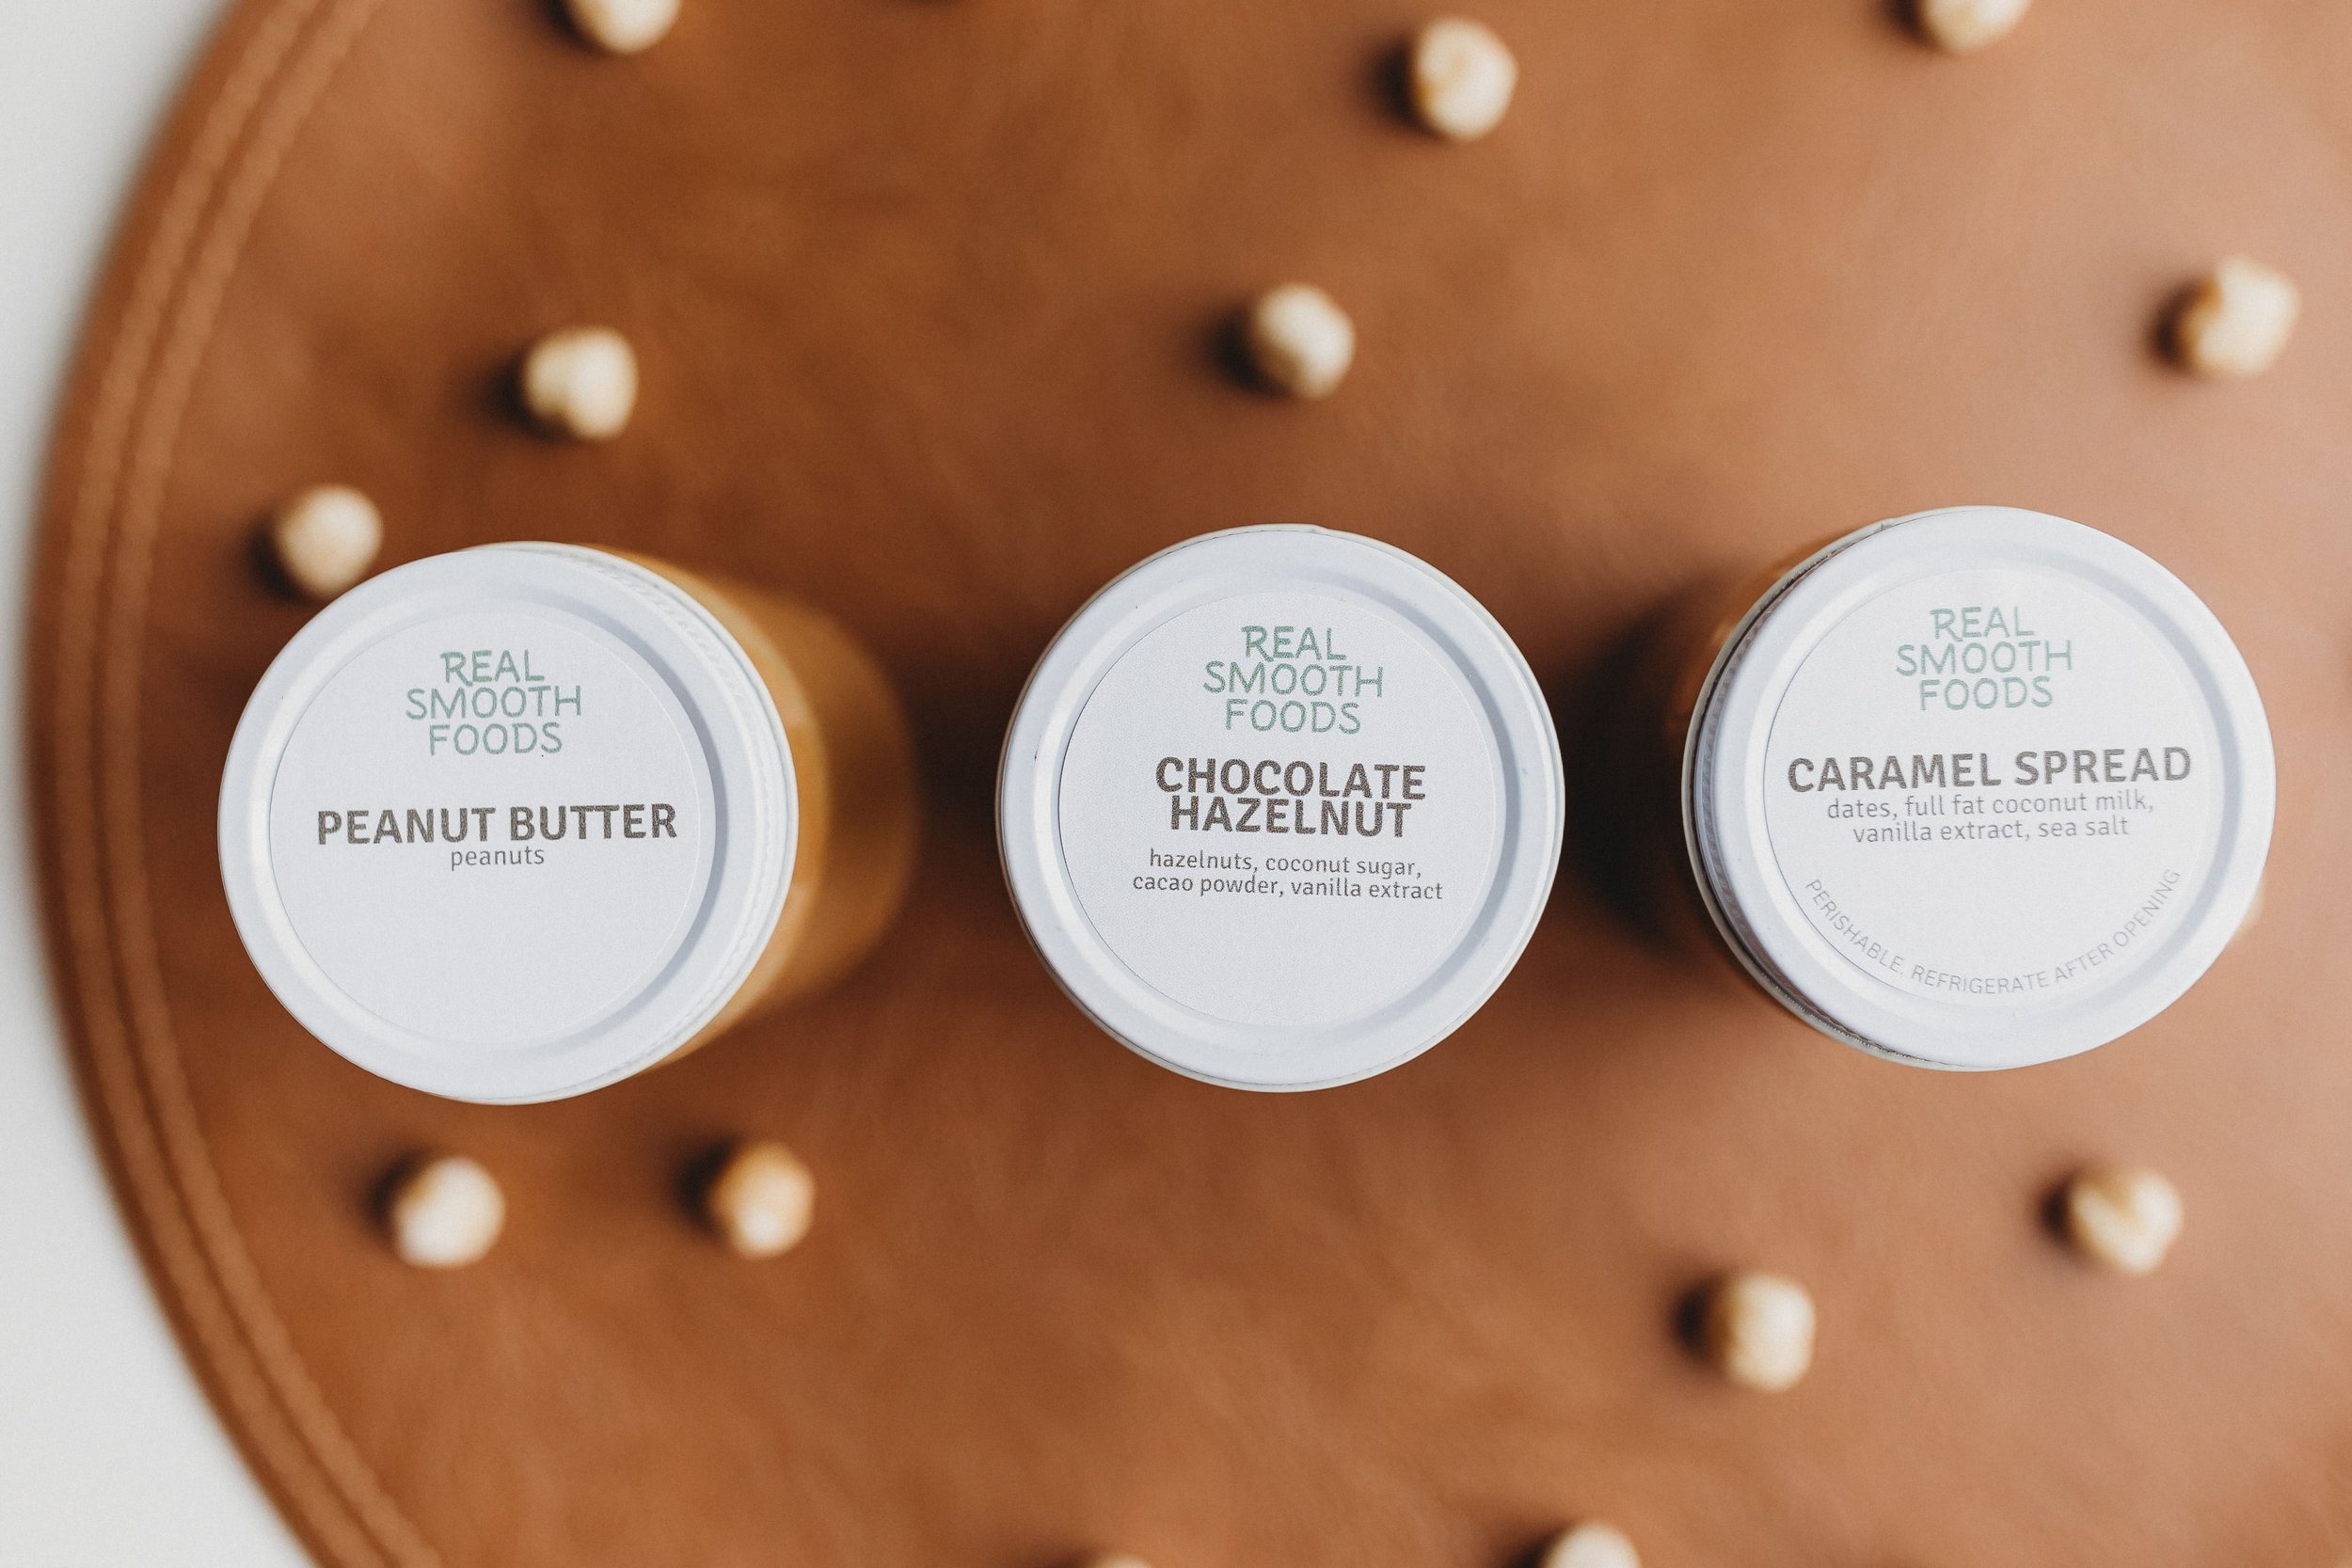  pb, chocolate hazelnut, and caramel spreads sit during a food product photography shoot 